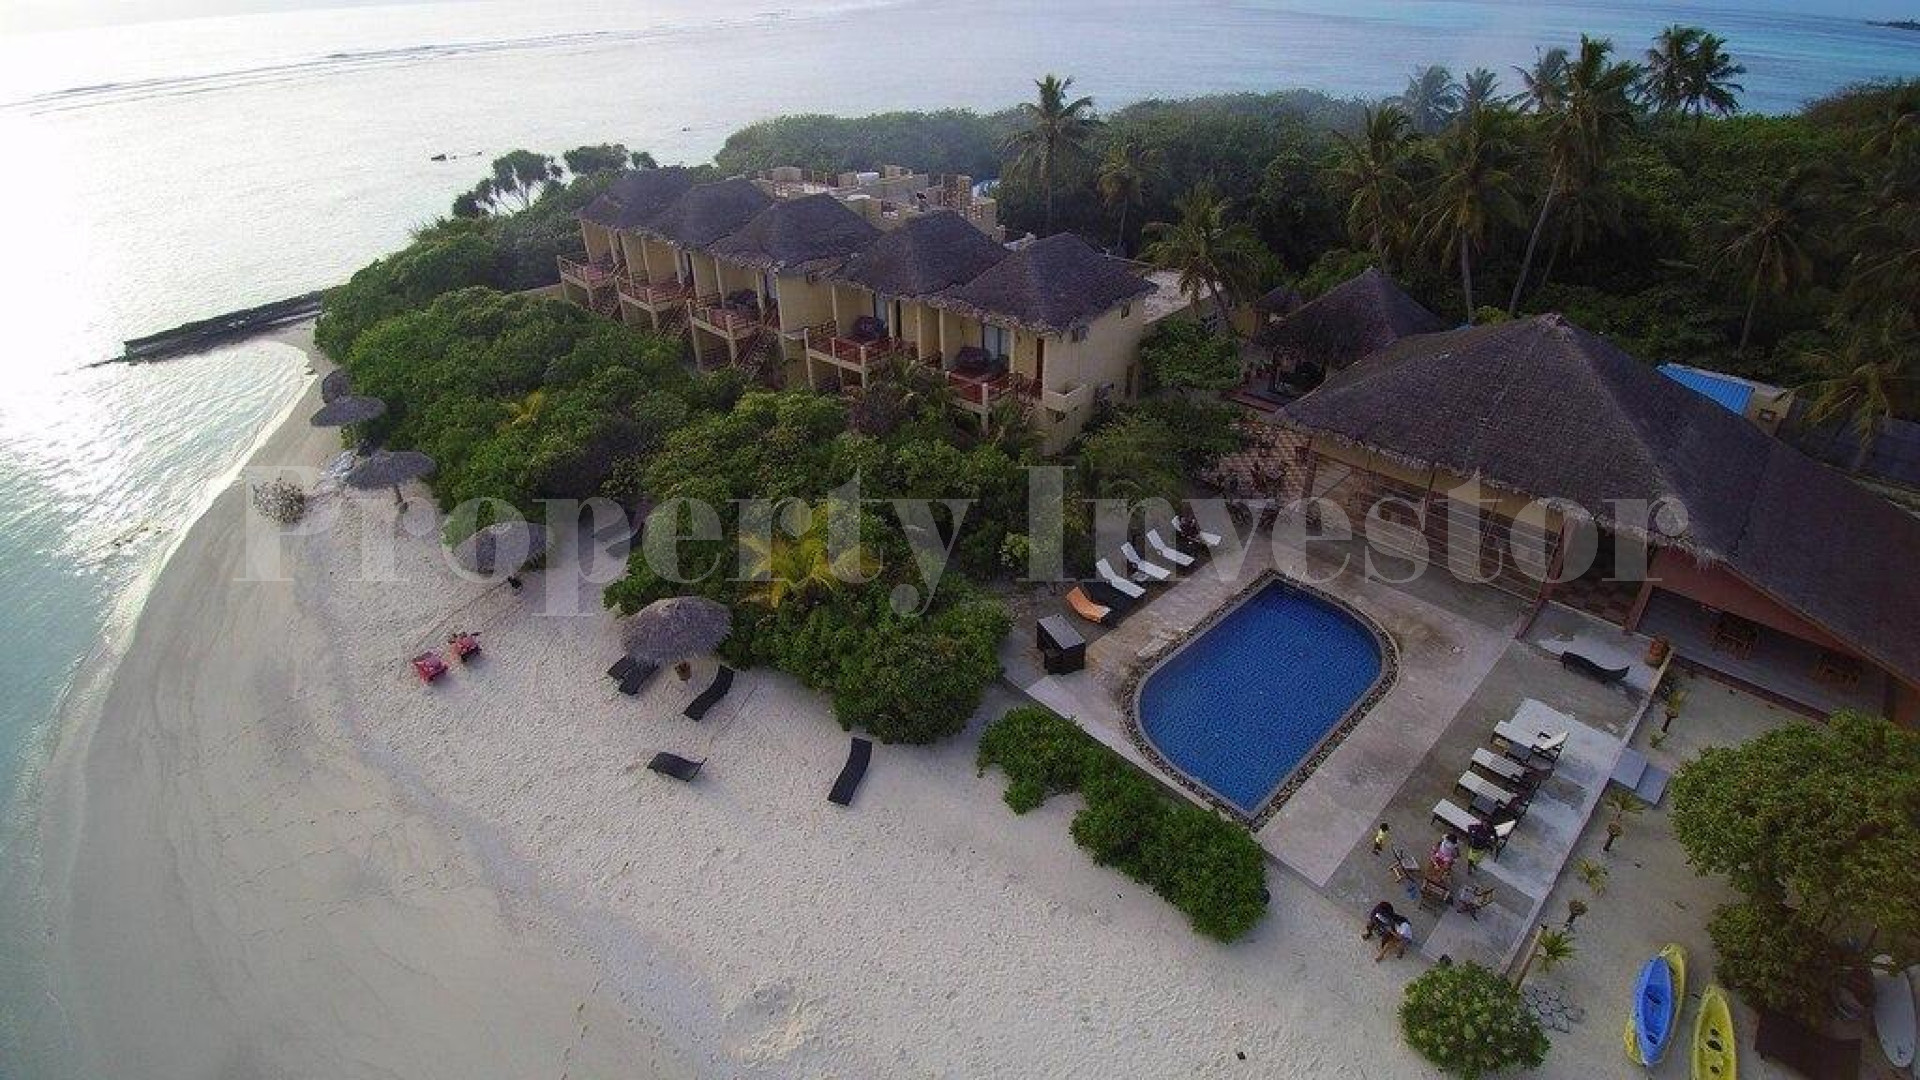 Functioning 42 Room Resort with 2 Hectare 50 Villa Development Expansion Plan for Sale in the Maldives